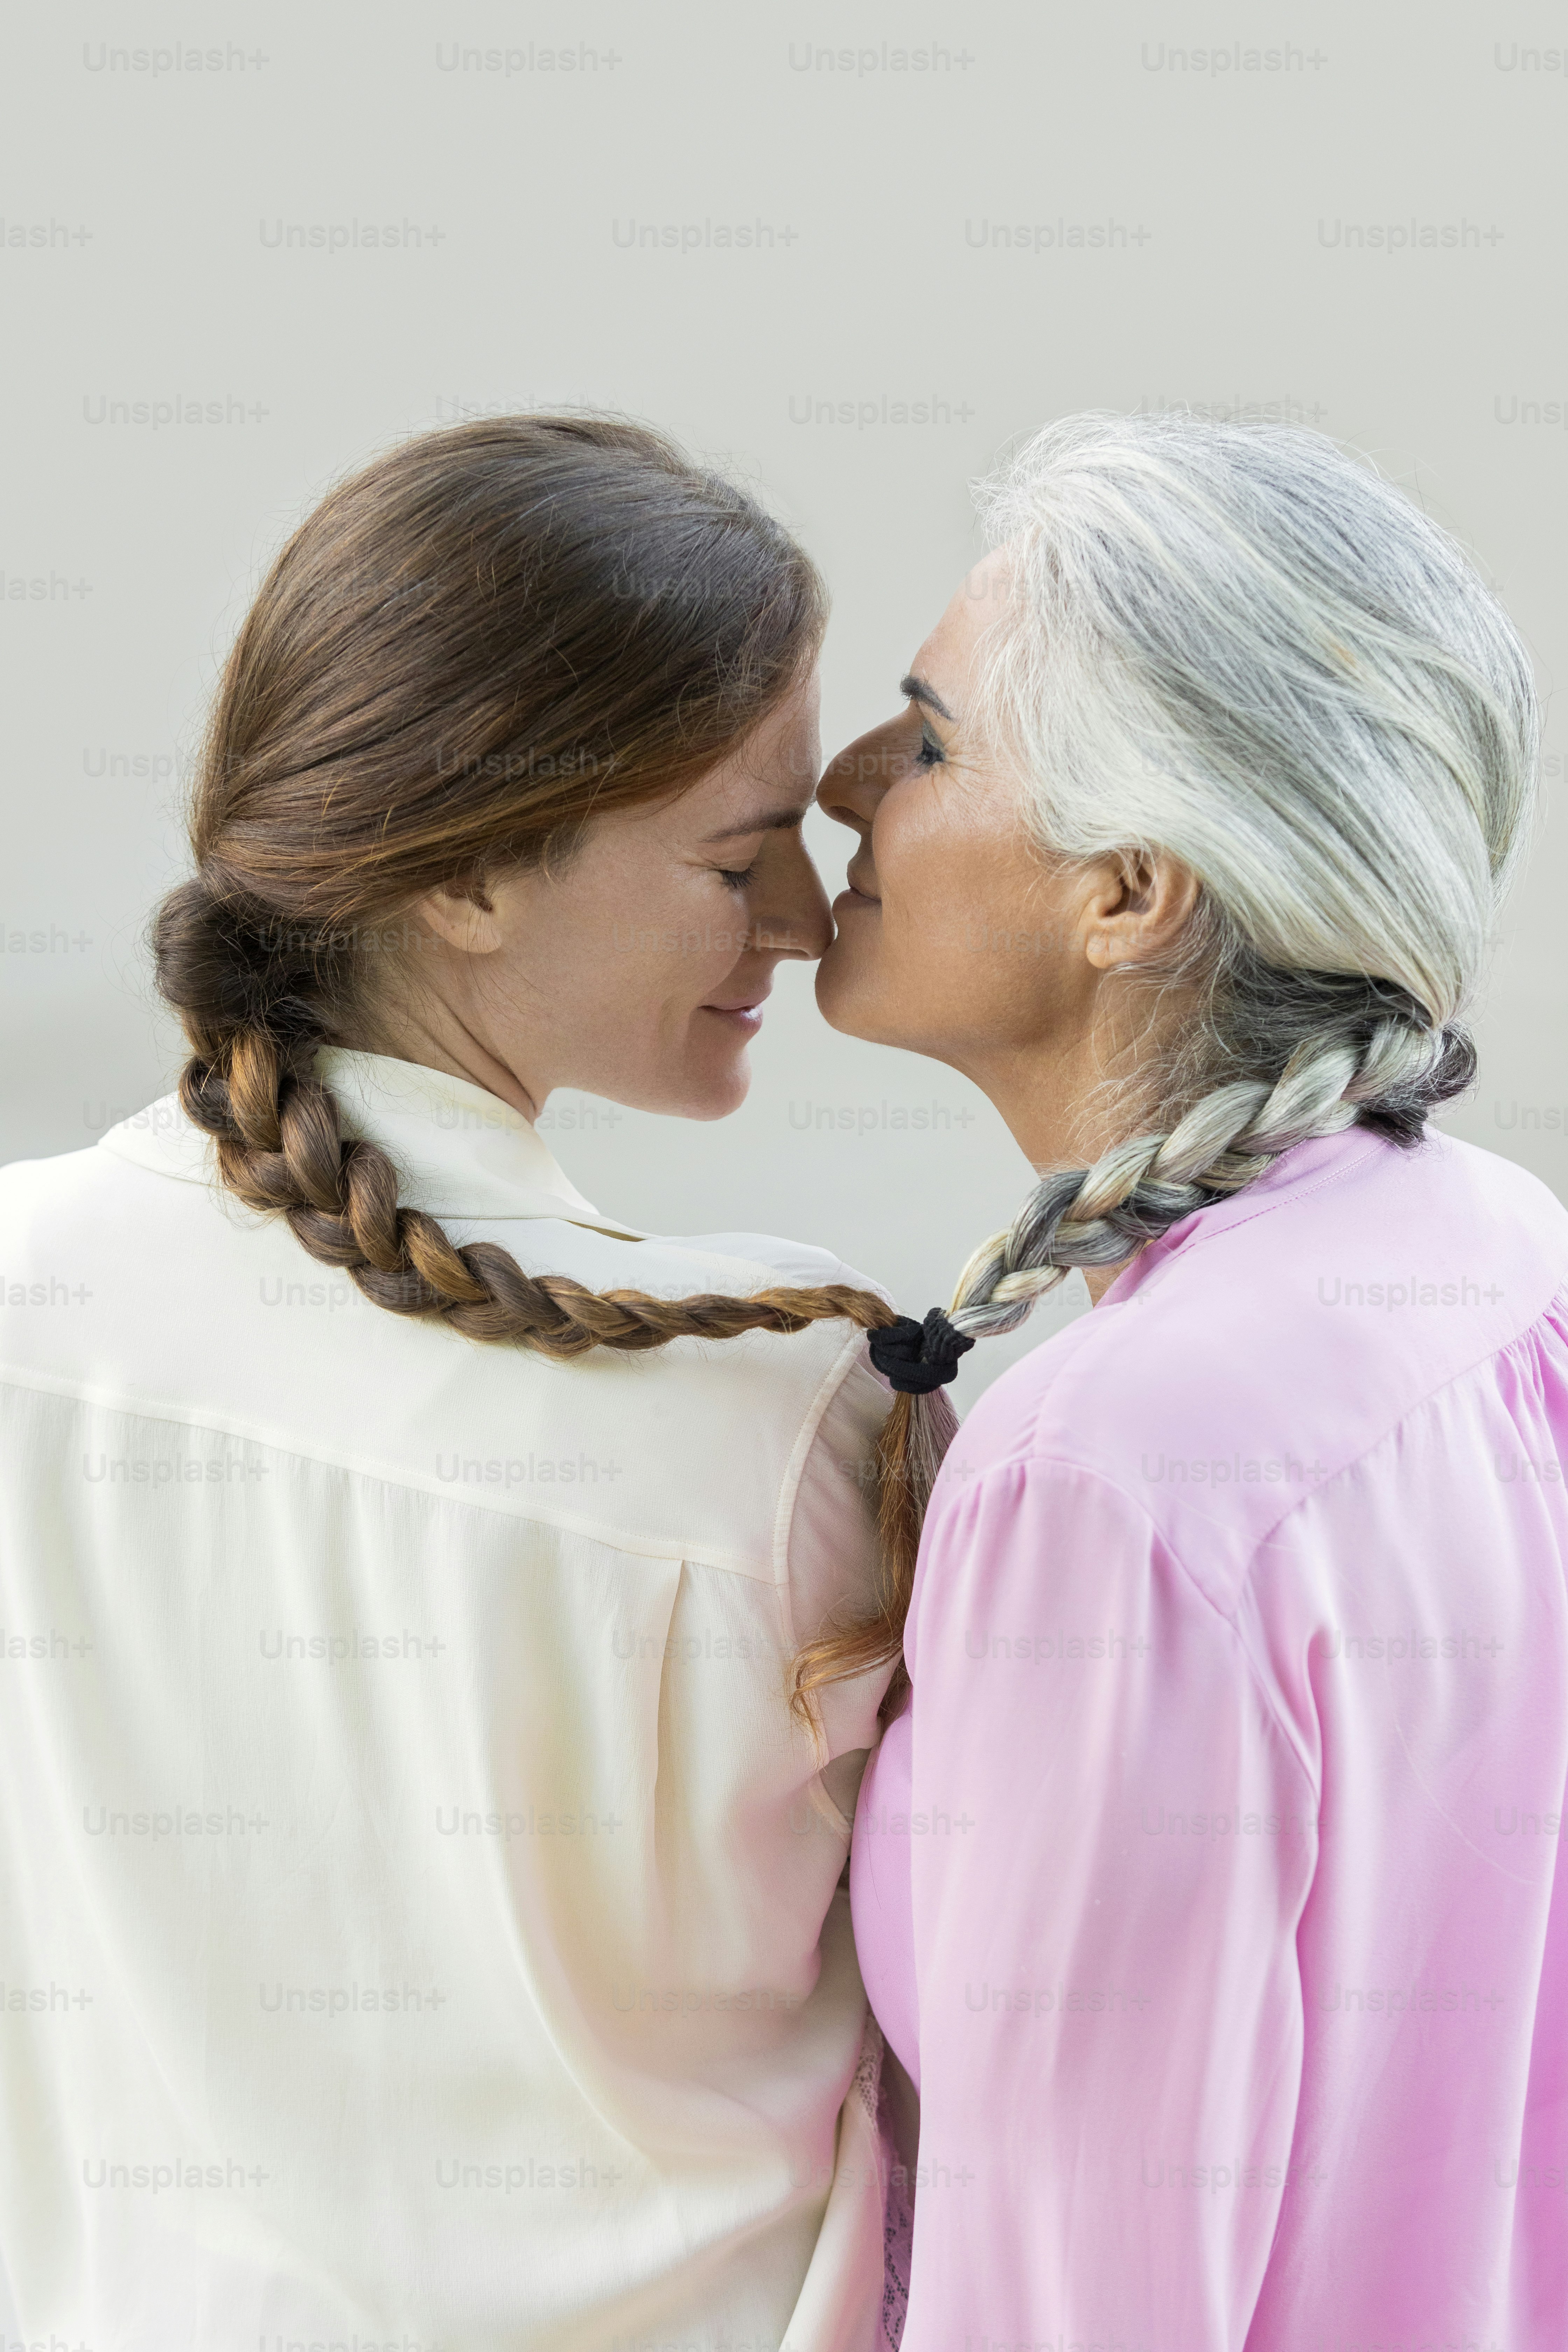 750+ Lesbian Kiss Pictures Download Free Images on Unsplash picture